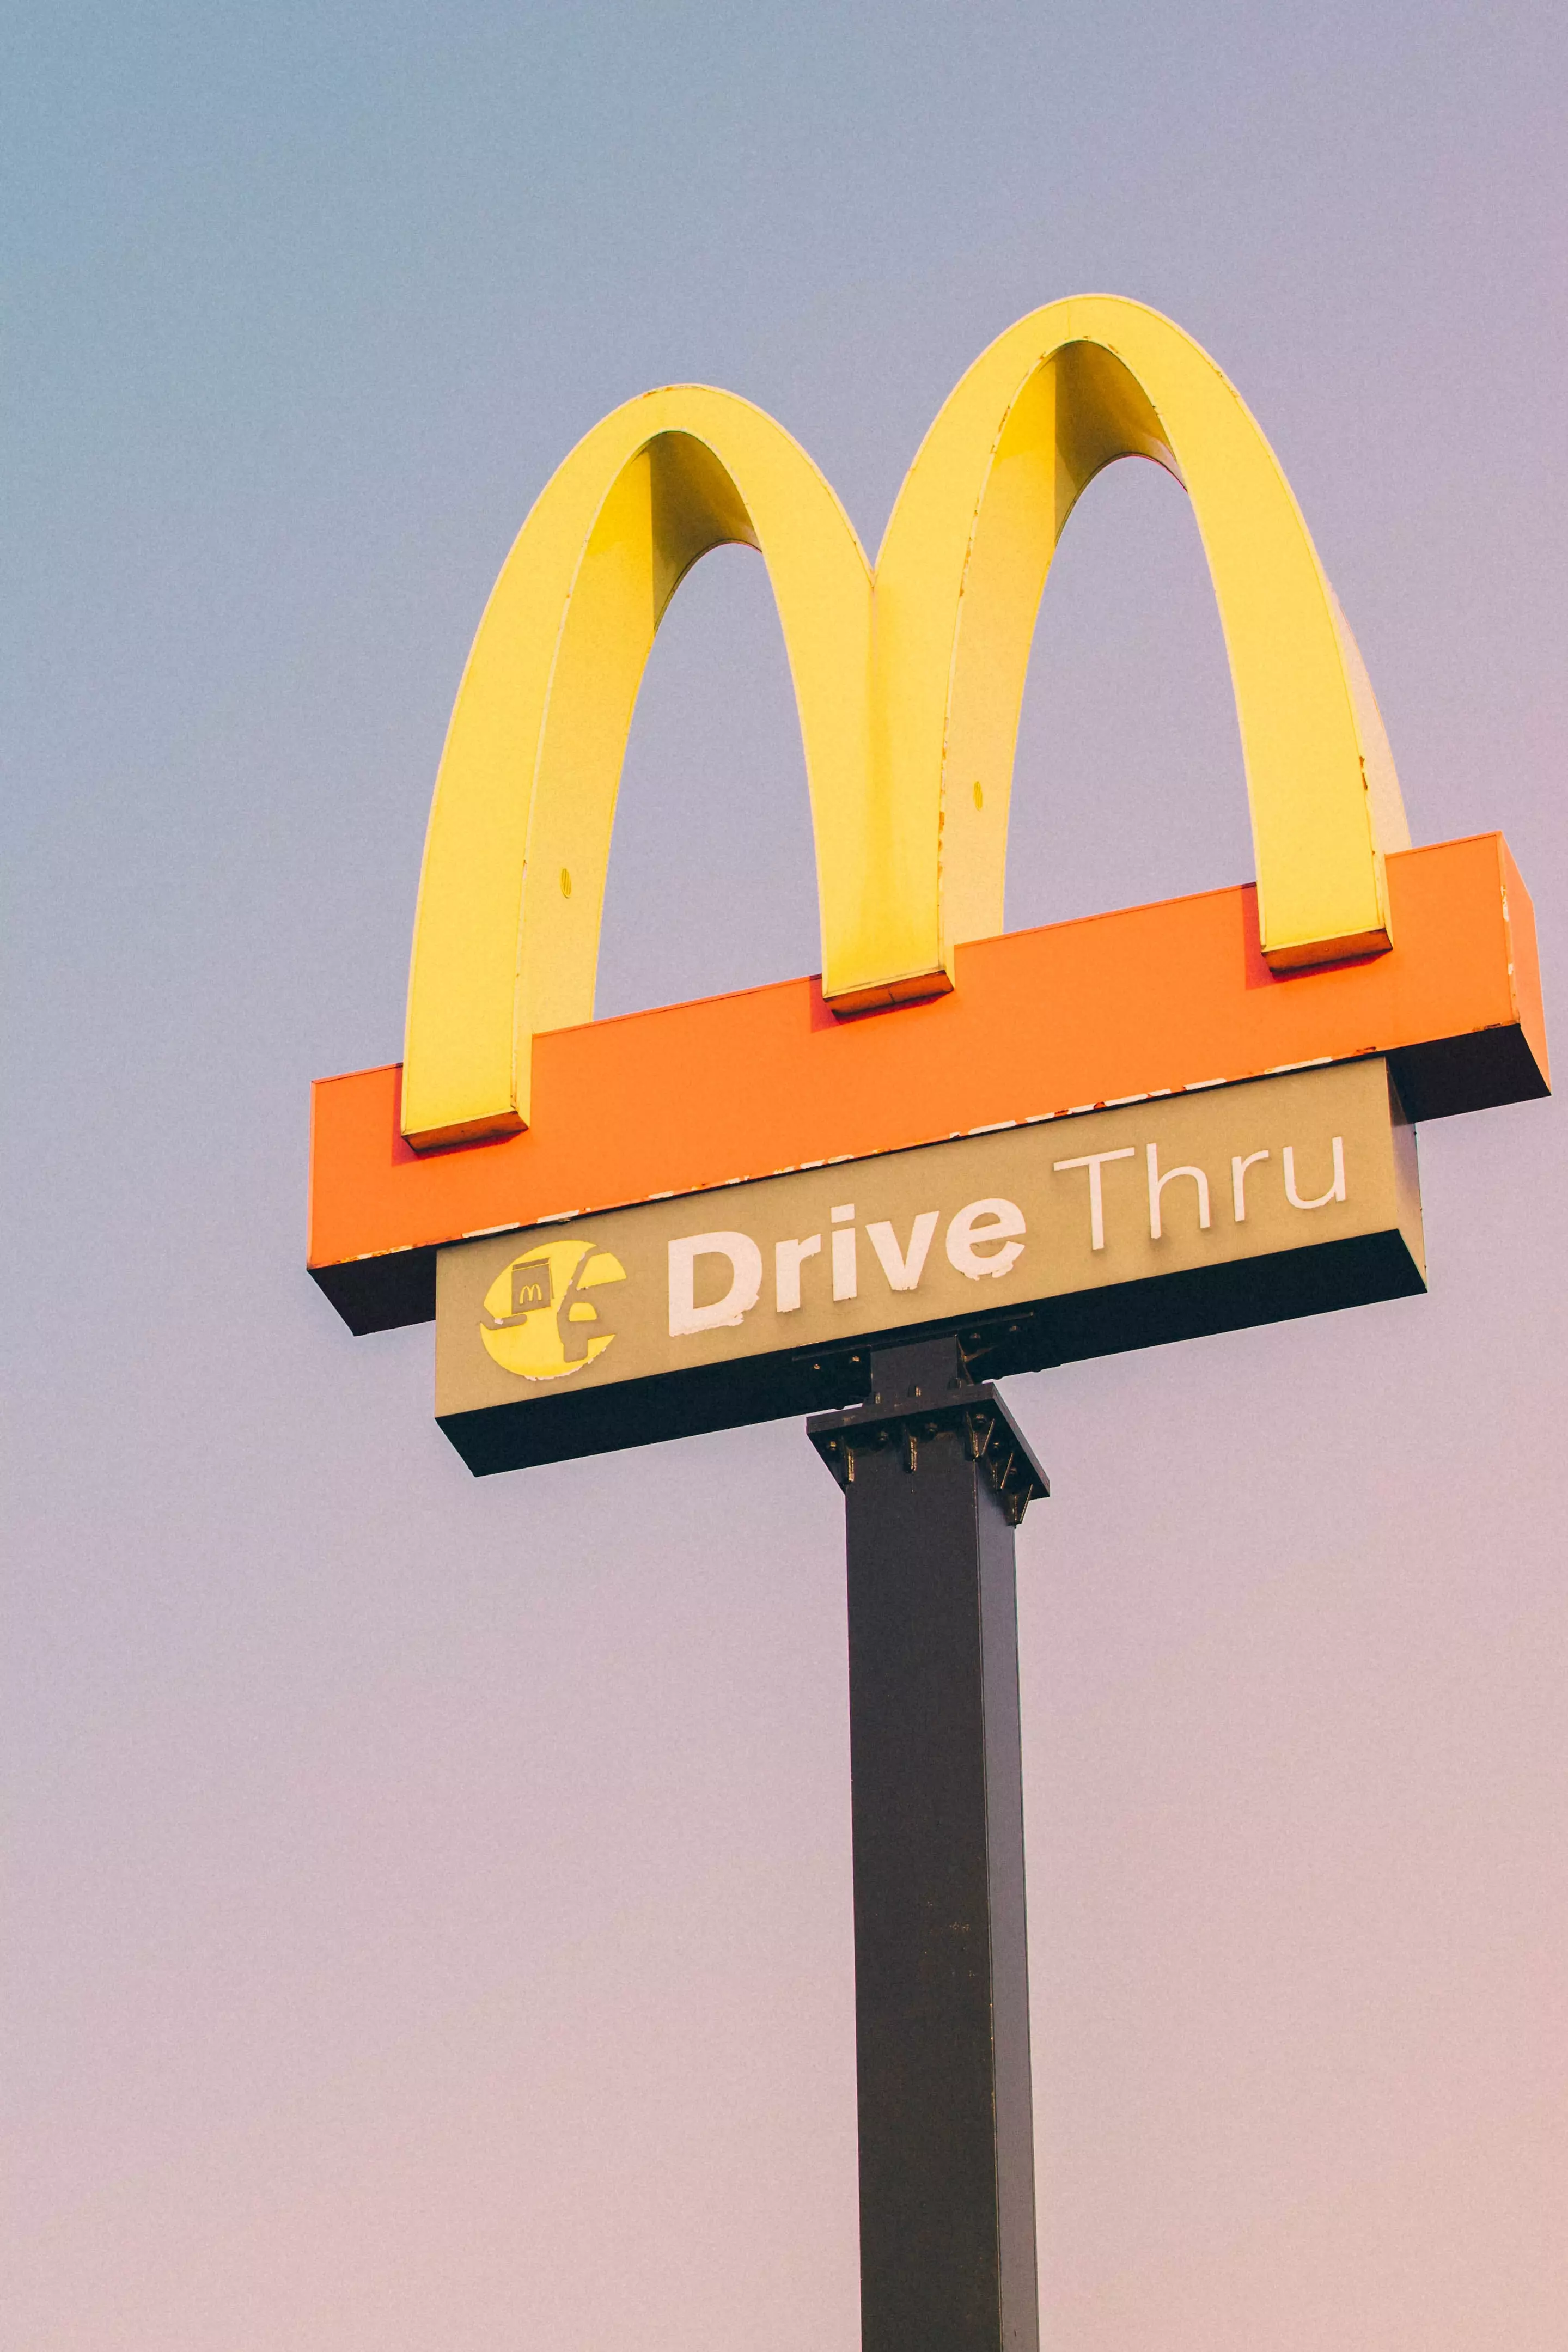 McDonald's is open for drive-thru and delivery (